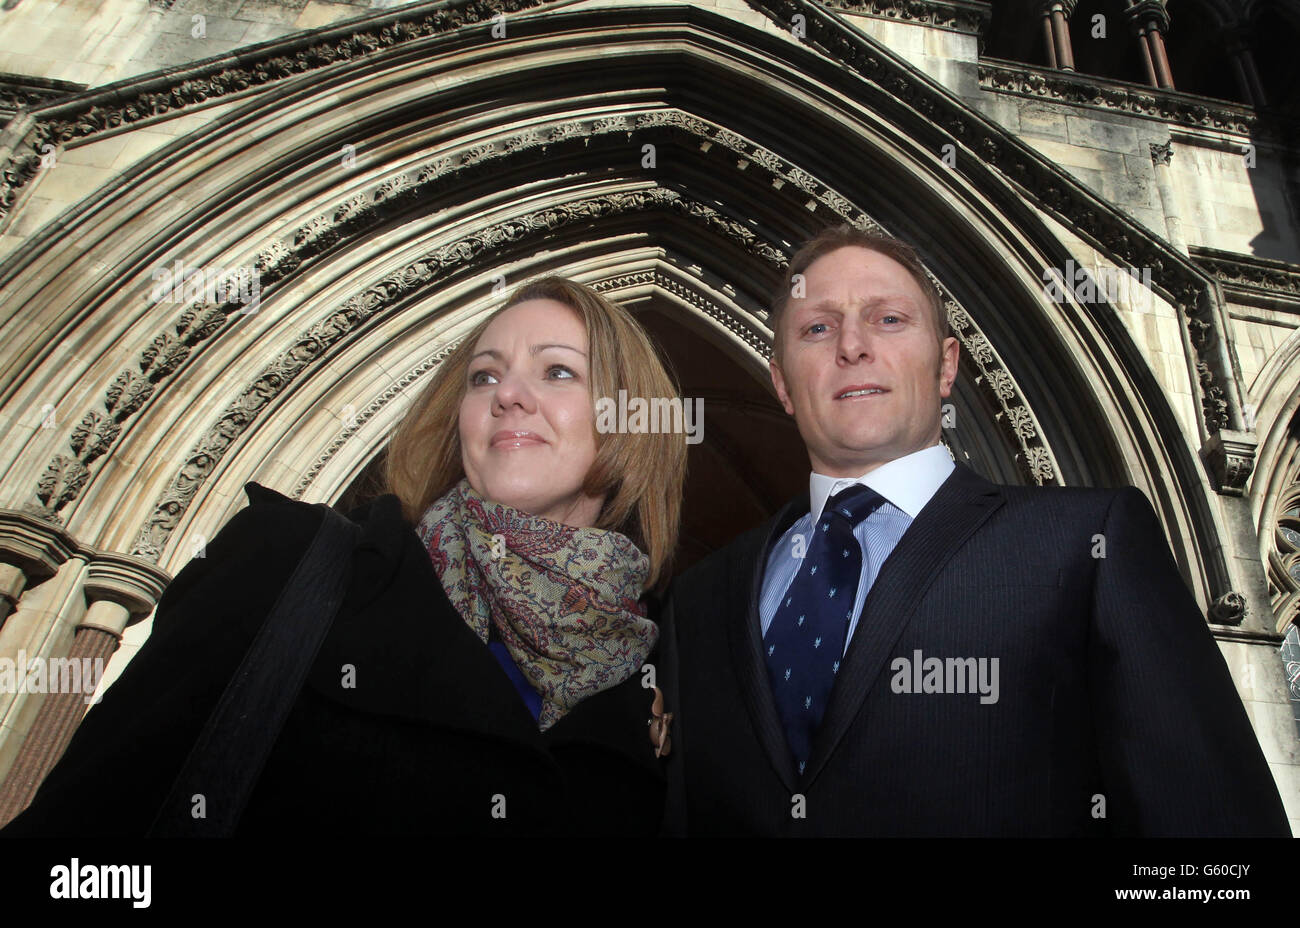 SAS sniper Sergeant Danny Nightingale from Crewe, Cheshire, with his wife Sally. He was jailed last year for illegally possessing a firearm and ammunition, but later freed after an appeal against sentence and widespread outcry. He is appealing against his conviction to clear his name at The Royal Courts of Justice. Stock Photo